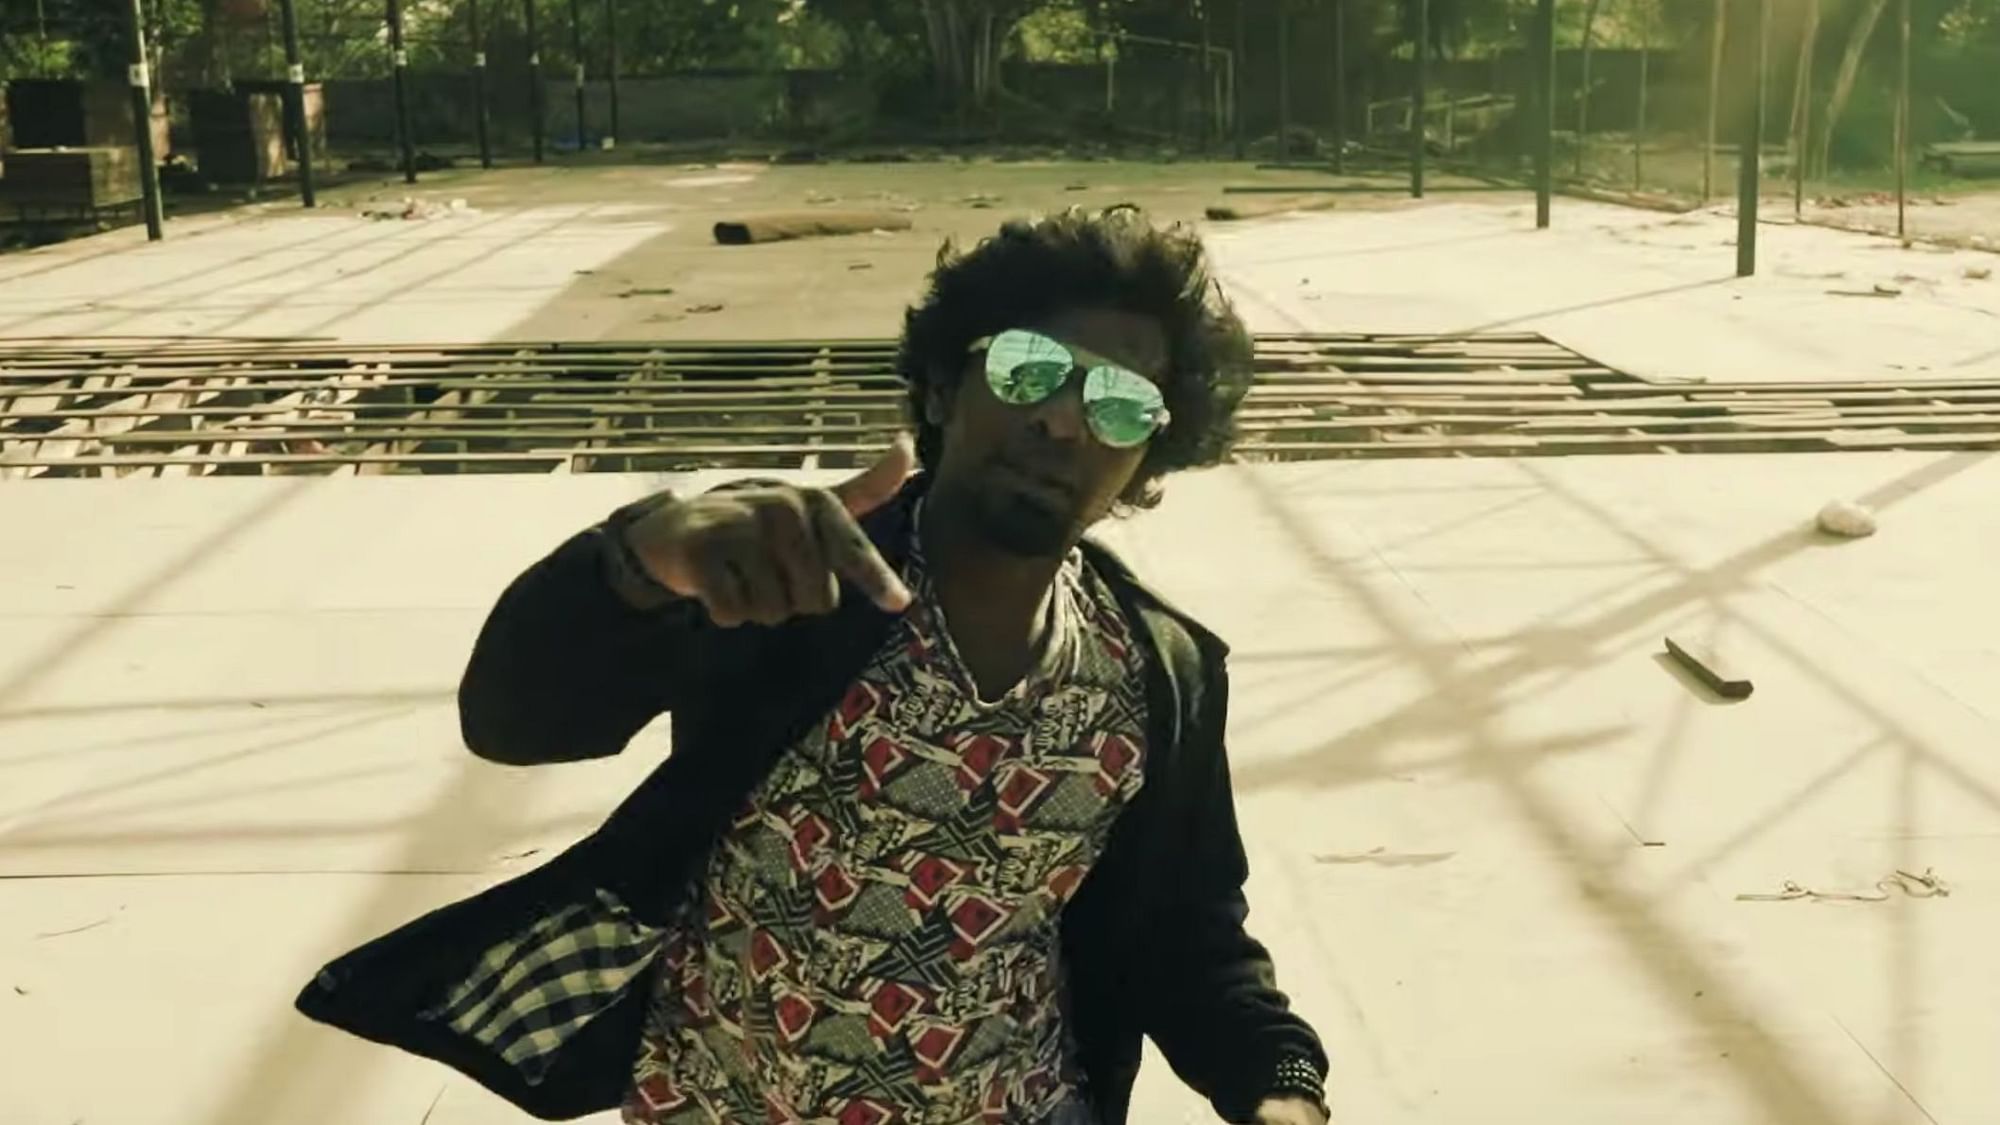 Chennai rapper Nigavithran has released a protest song expressing solidarity with students protesting against CAA, NRC.